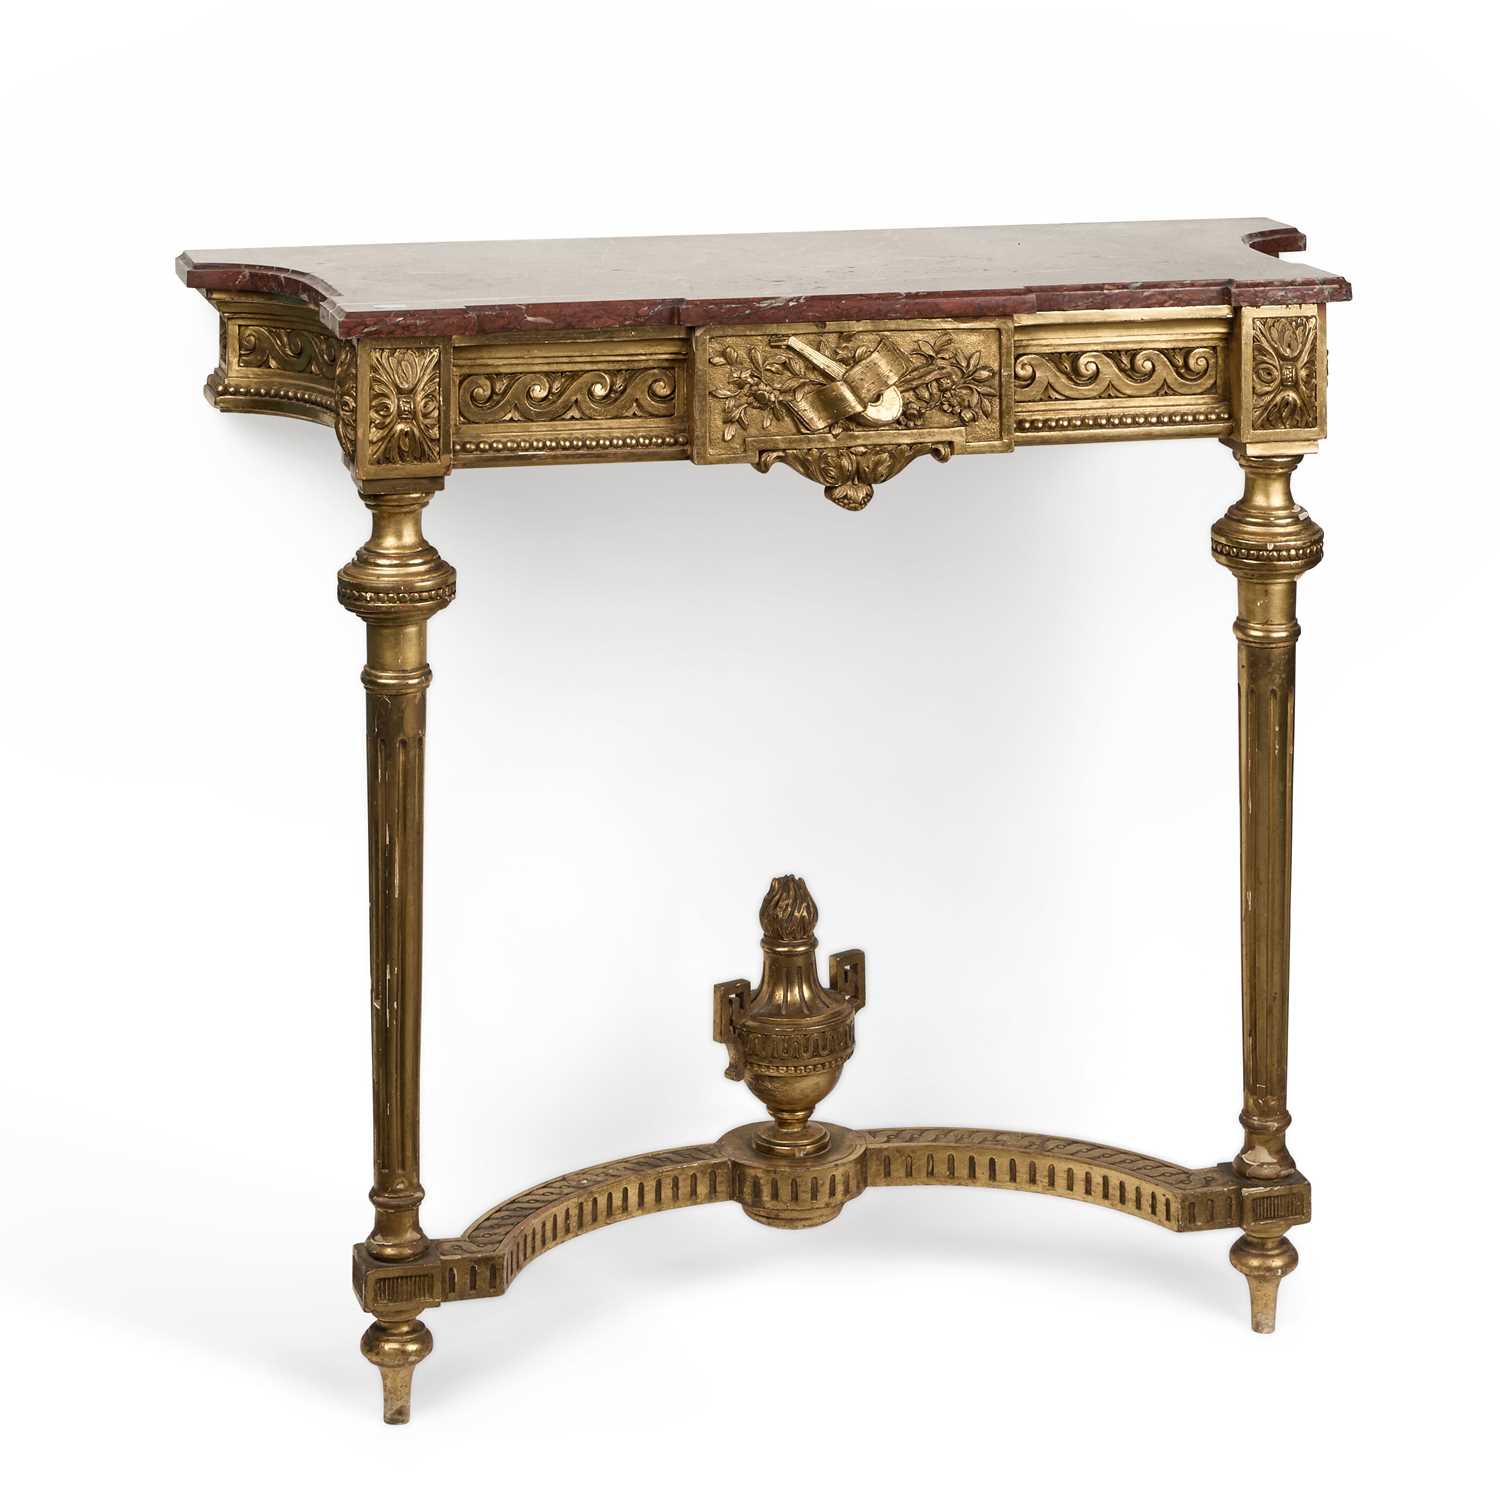 AN EMPIRE STYLE MARBLE-TOPPED GILTWOOD CONSOLE TABLE